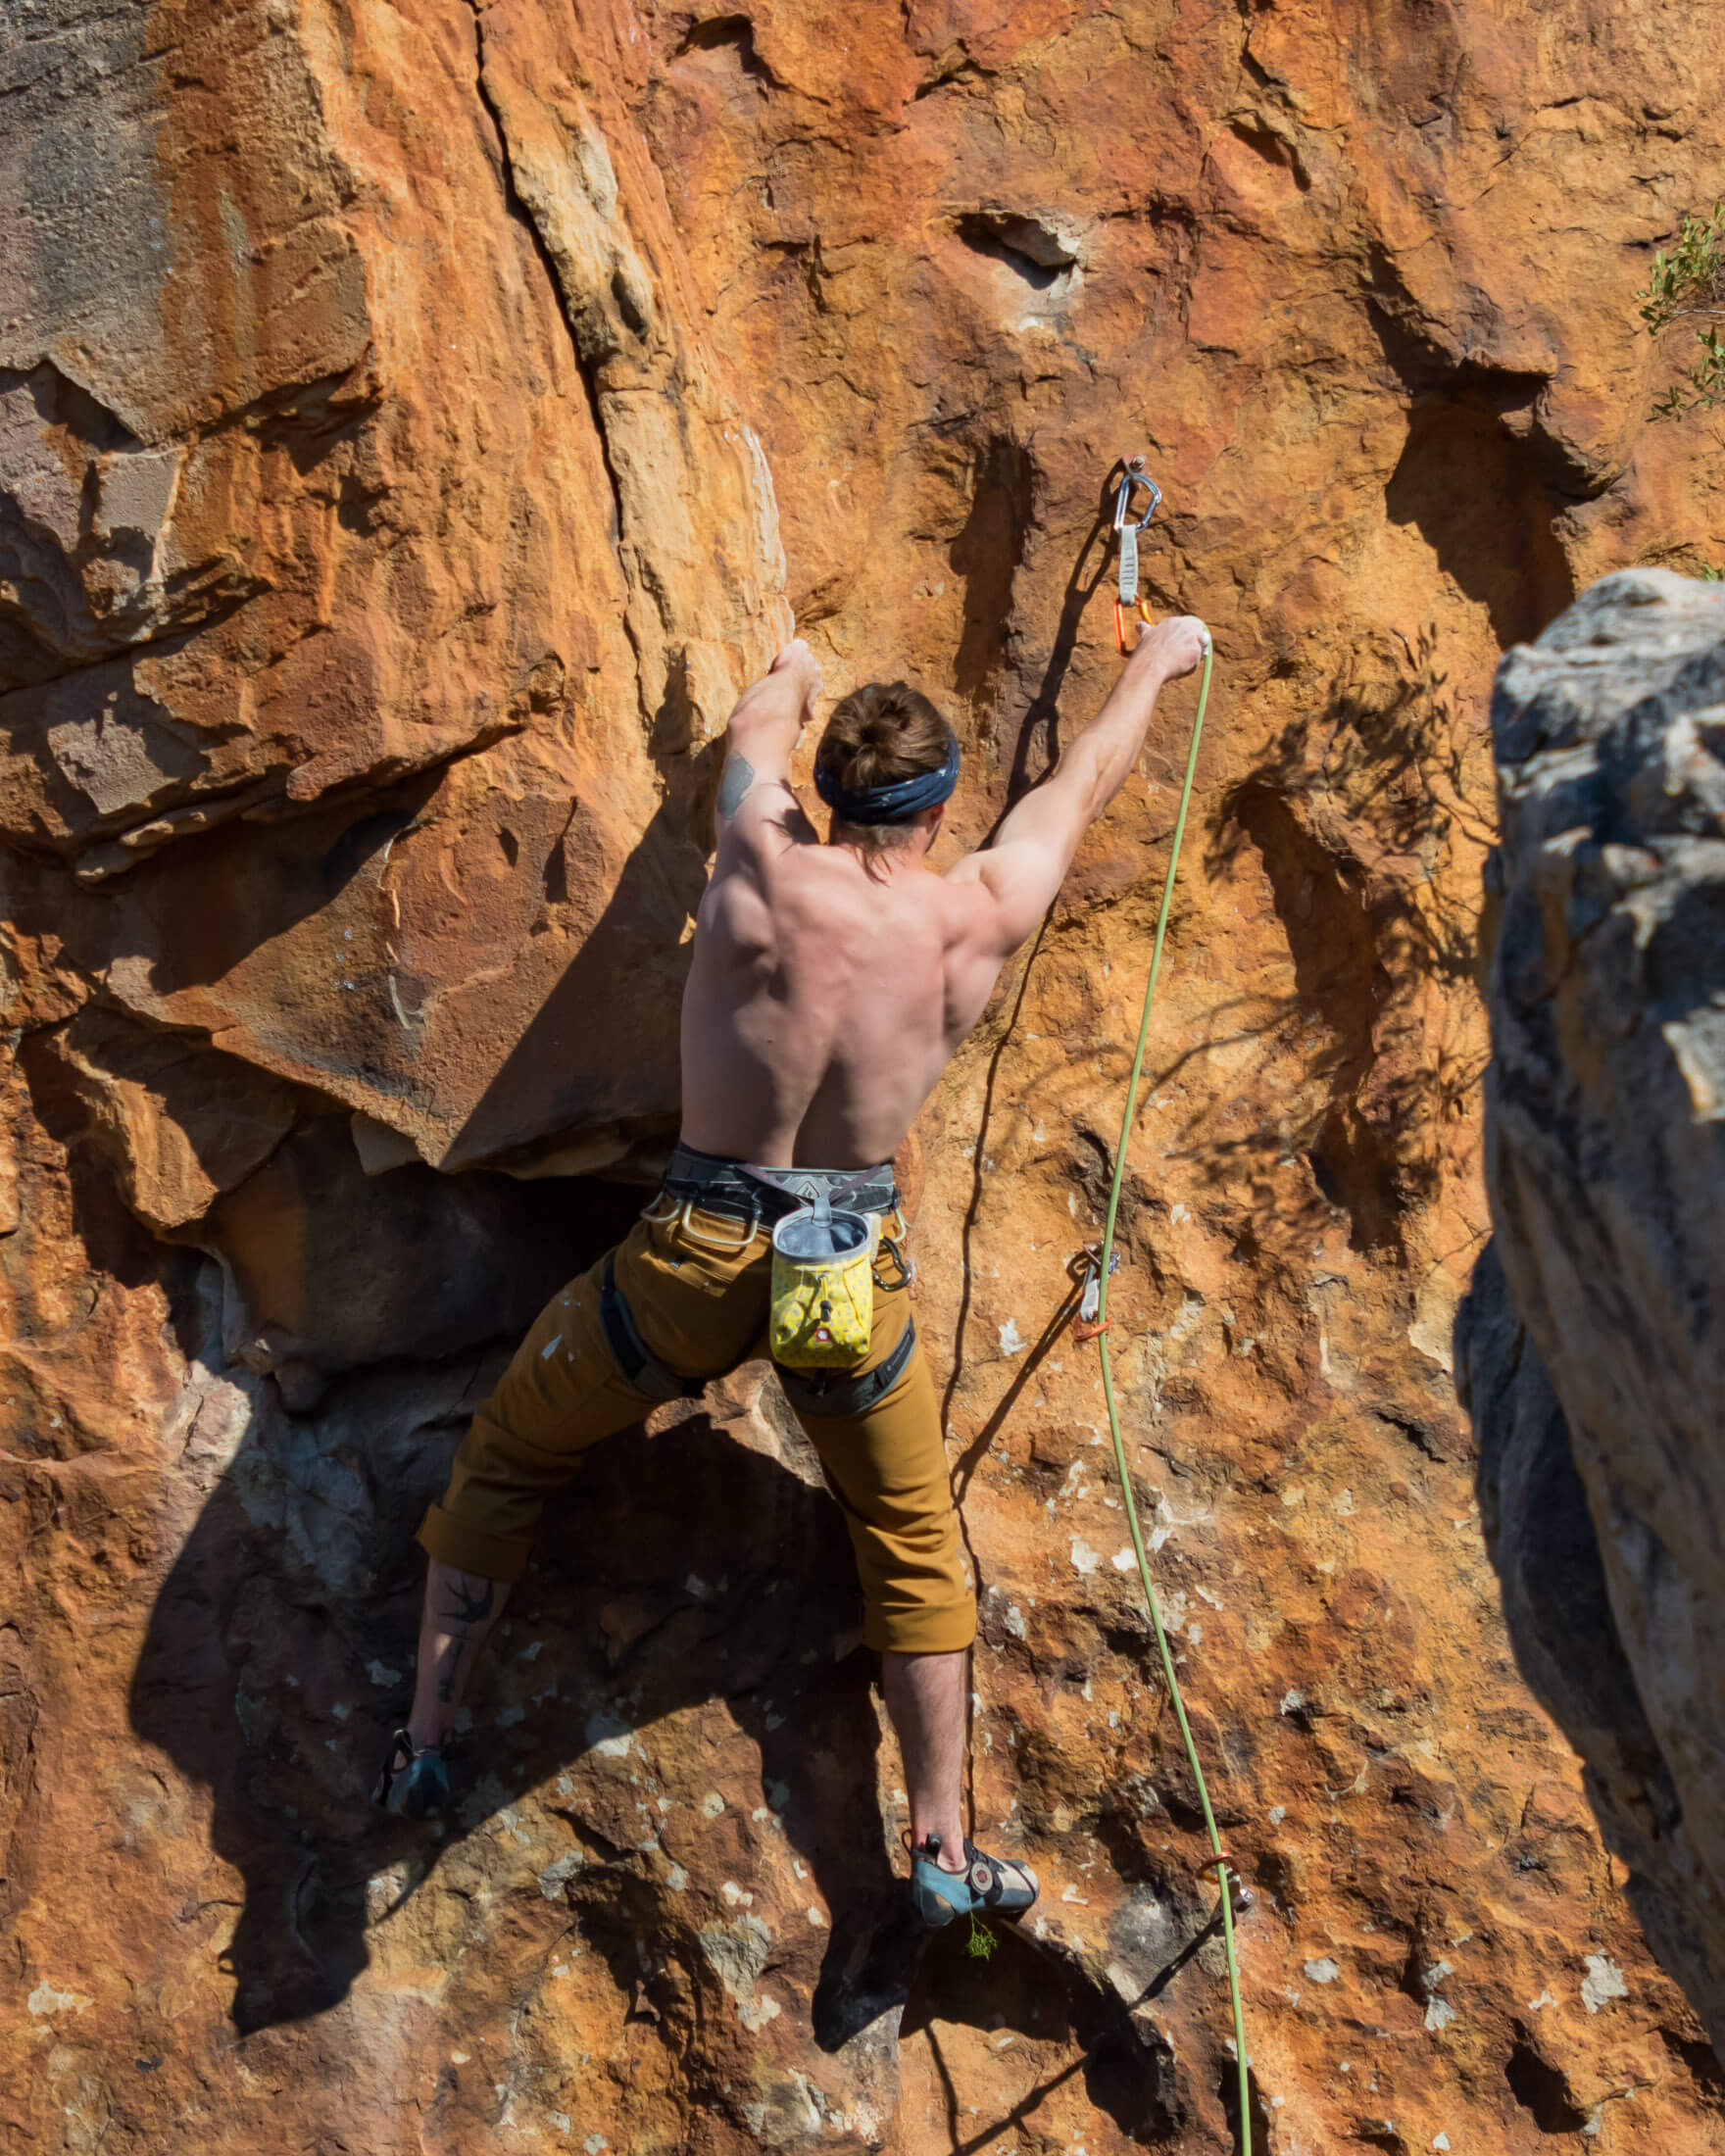 sport climber clipping the first few bolts on a route